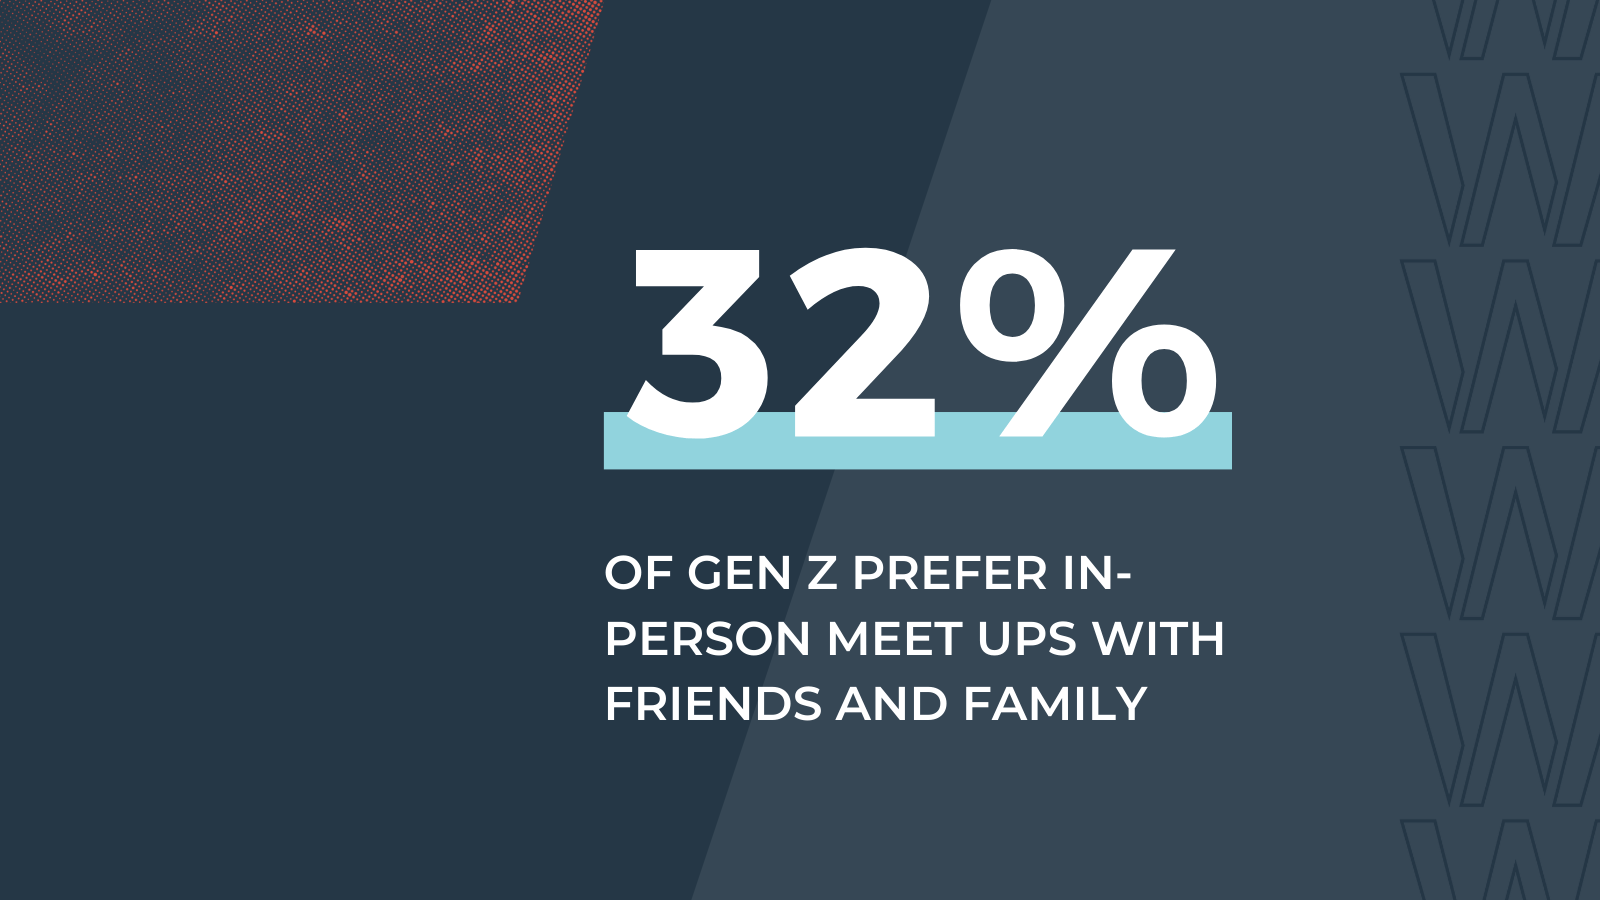 Gen Z's preference for in person meetups